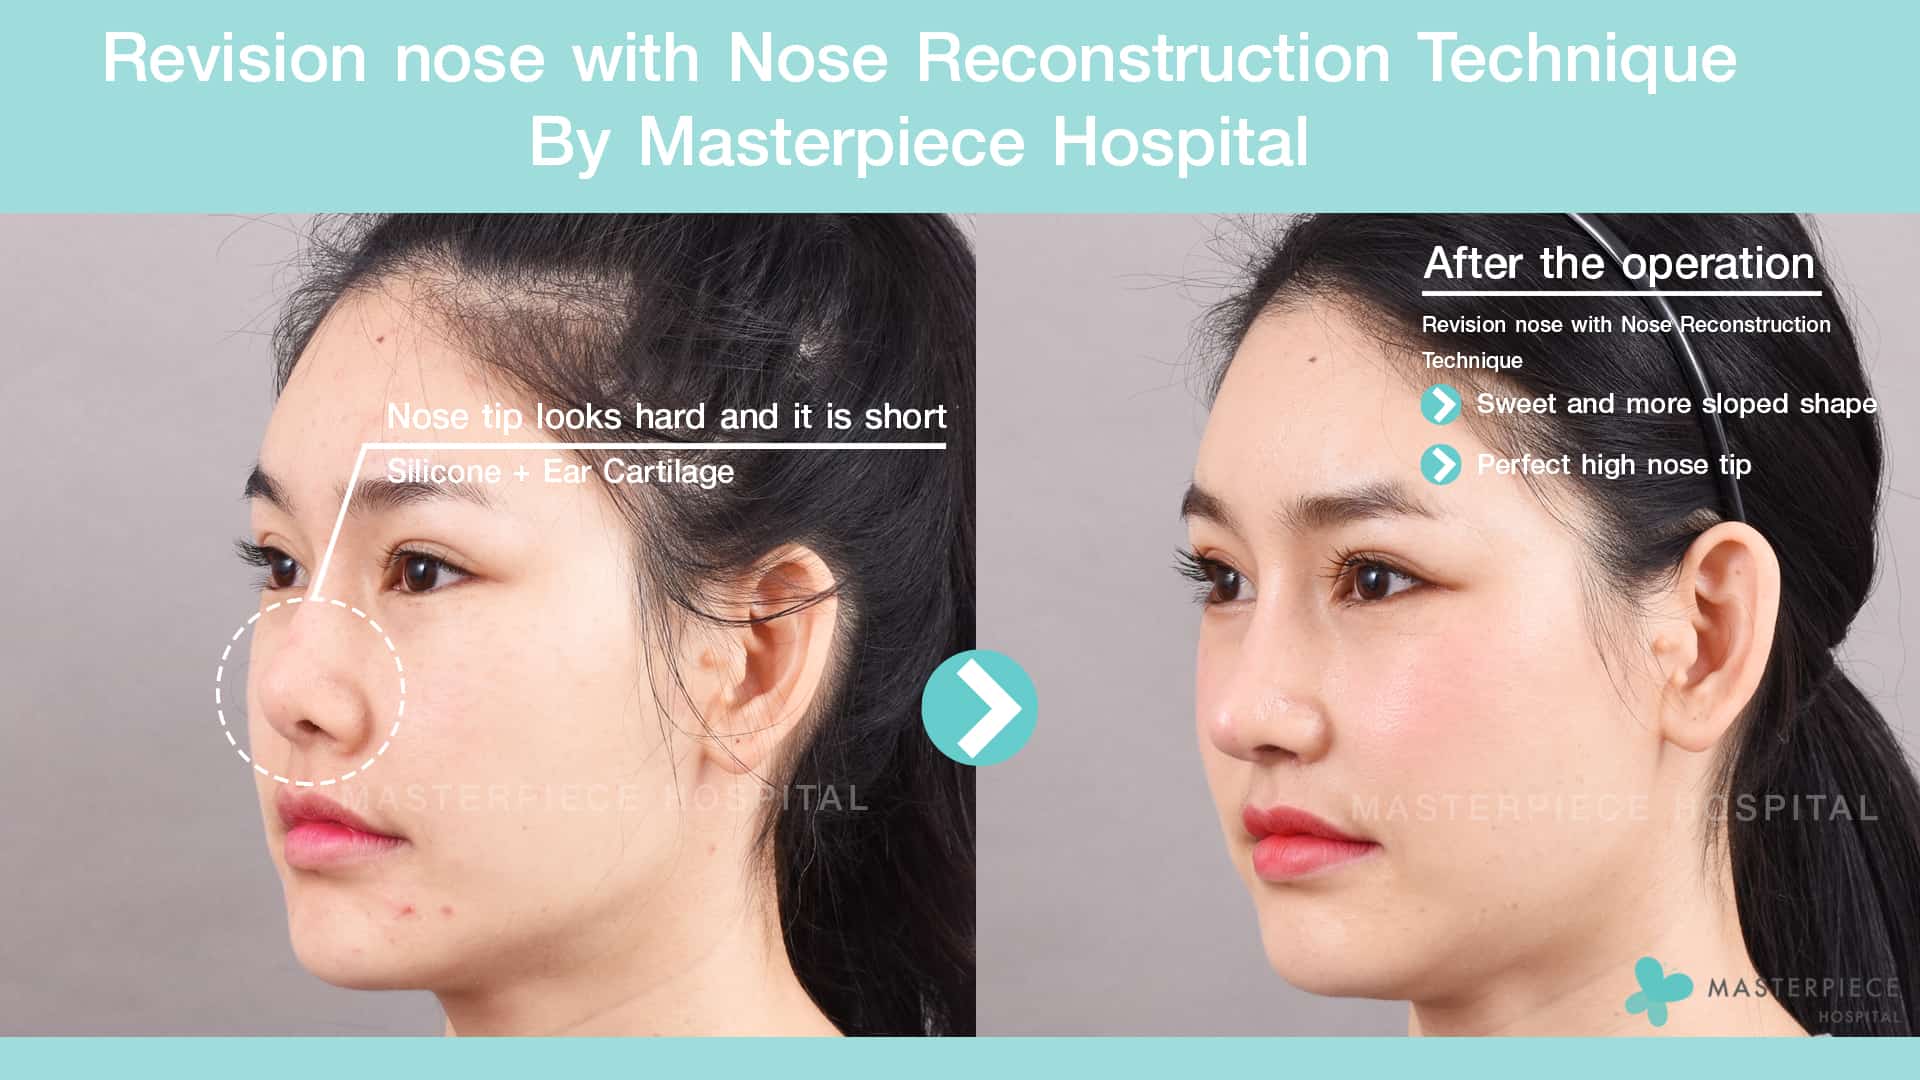 Revision nose with Nose Reconstruction Technique